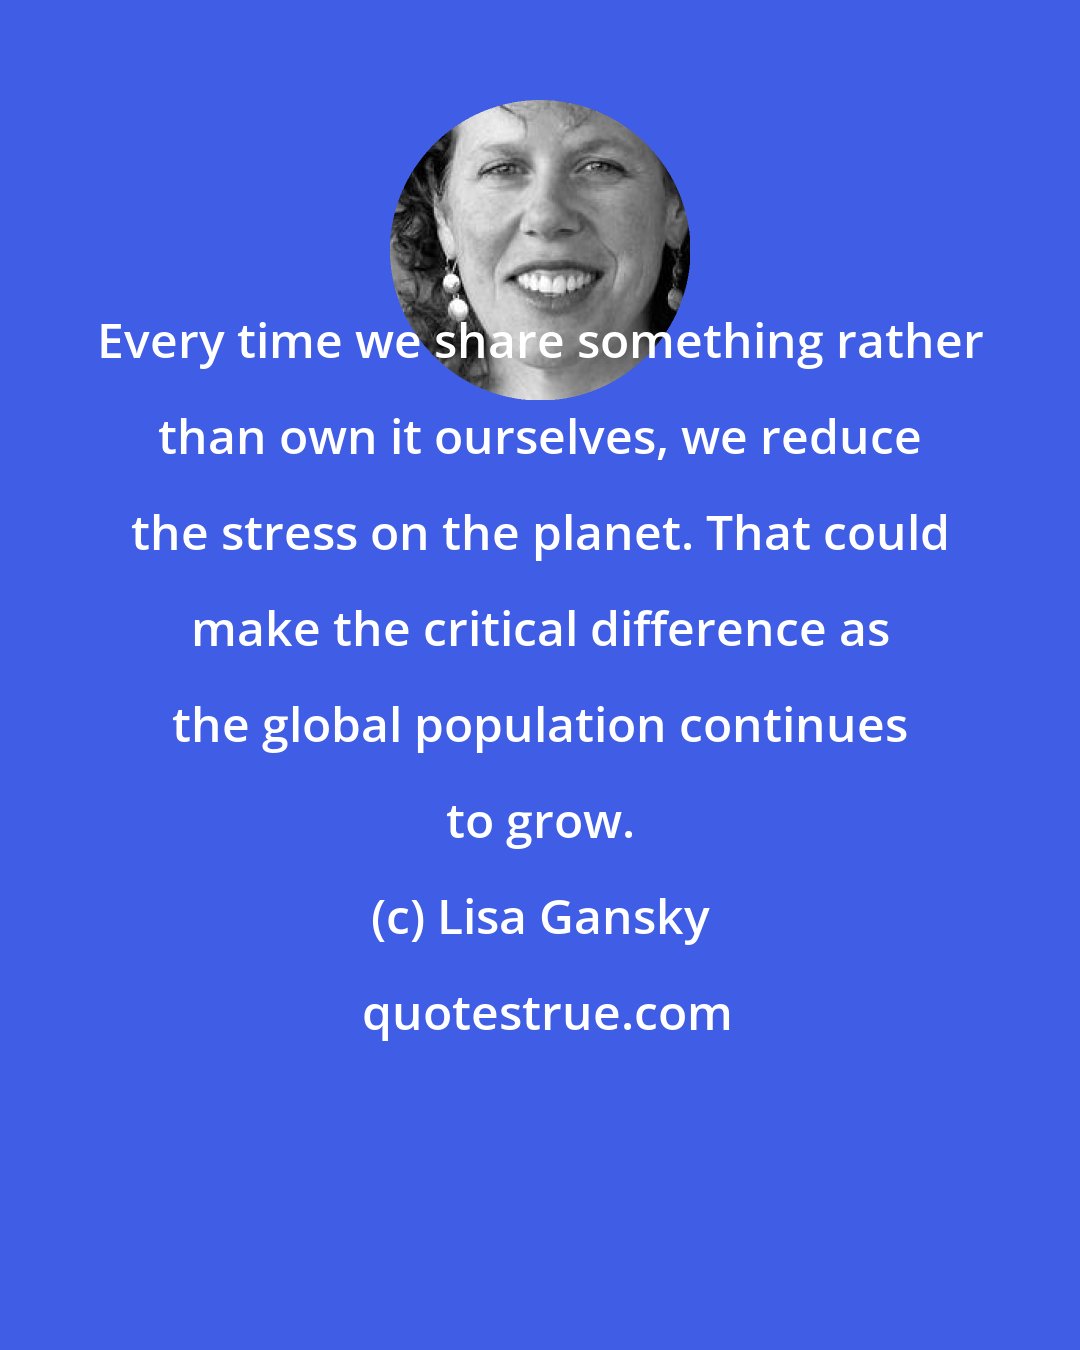 Lisa Gansky: Every time we share something rather than own it ourselves, we reduce the stress on the planet. That could make the critical difference as the global population continues to grow.